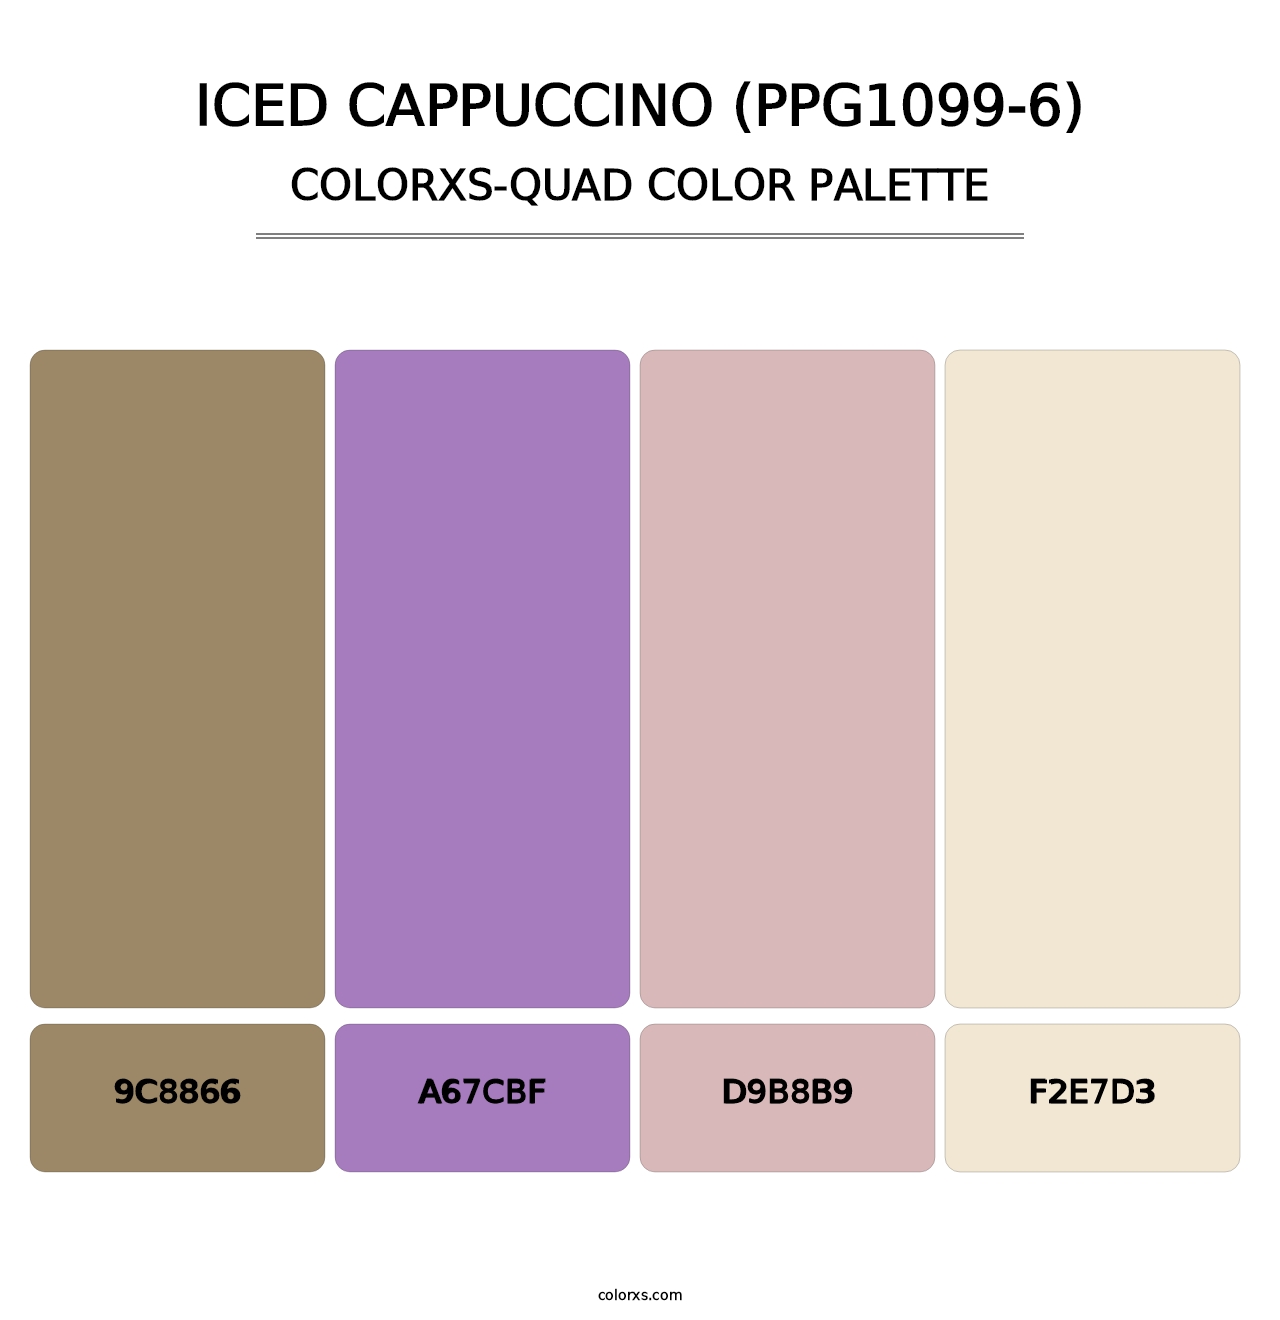 Iced Cappuccino (PPG1099-6) - Colorxs Quad Palette